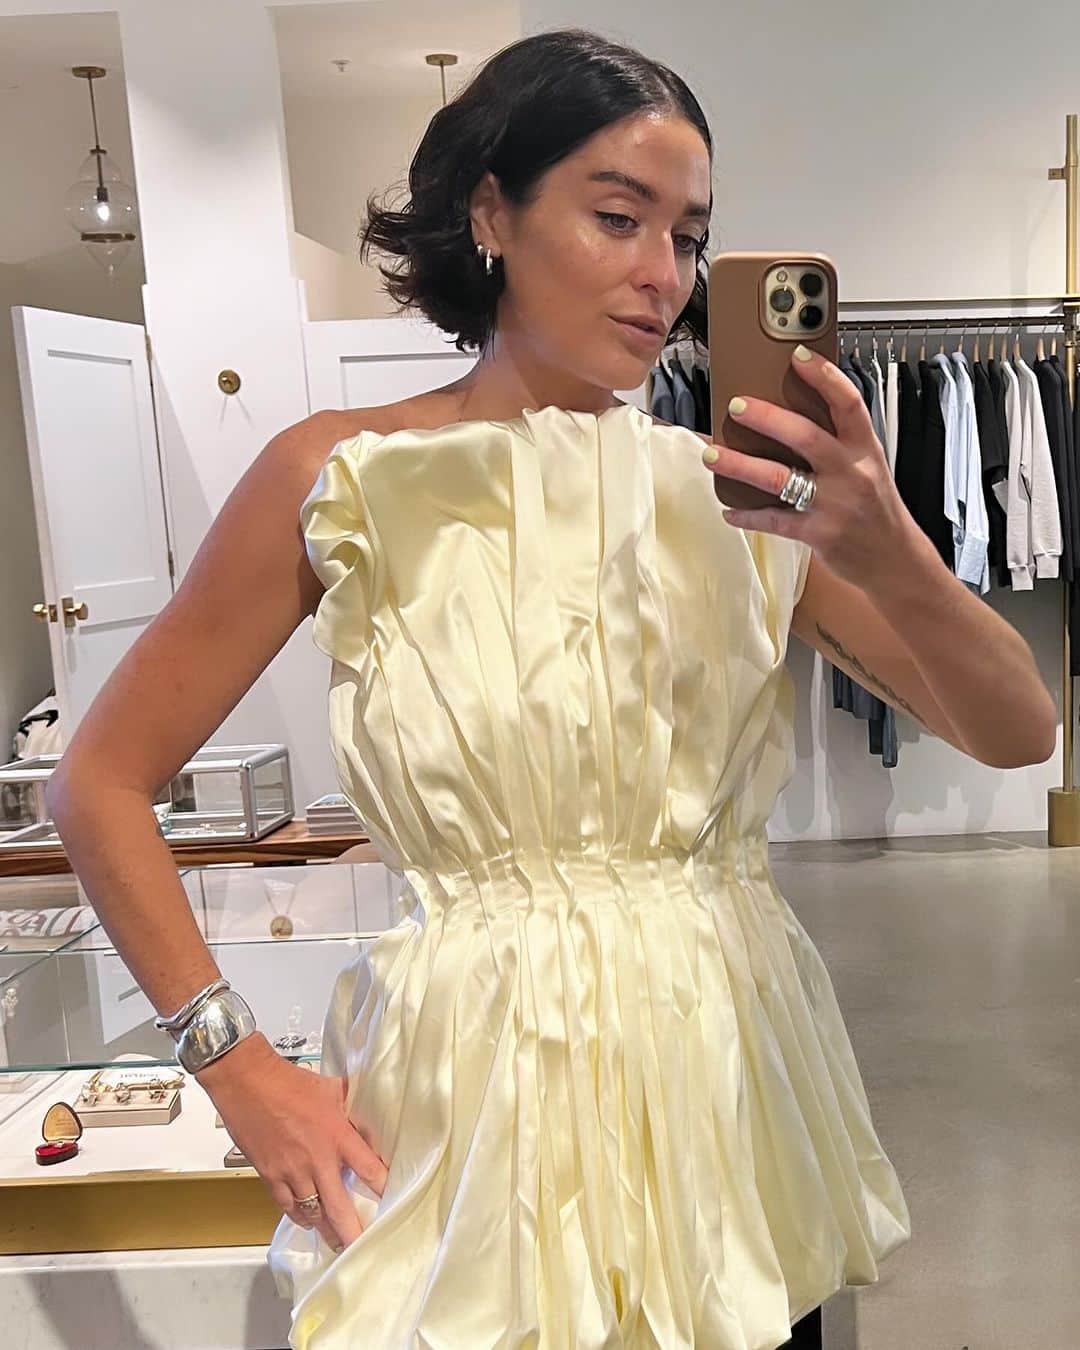 Fred Segalのインスタグラム：「ASH’S PICKS — Discover a few latest favorites from our SVP of Merchandising, @ash_petrie. 🤍  “While I'm home, I'll be wearing the @tovestudio 'Raynara' top for festive occasions – it's my personal couture gem.” “The @lowclassic_seoul suit, in its beautiful blue/green shade, effortlessly transitions from dinner events to casual days” “My everyday companion is the @publishedby 'Cloud Bag,' adding instant elevation to every look.”」